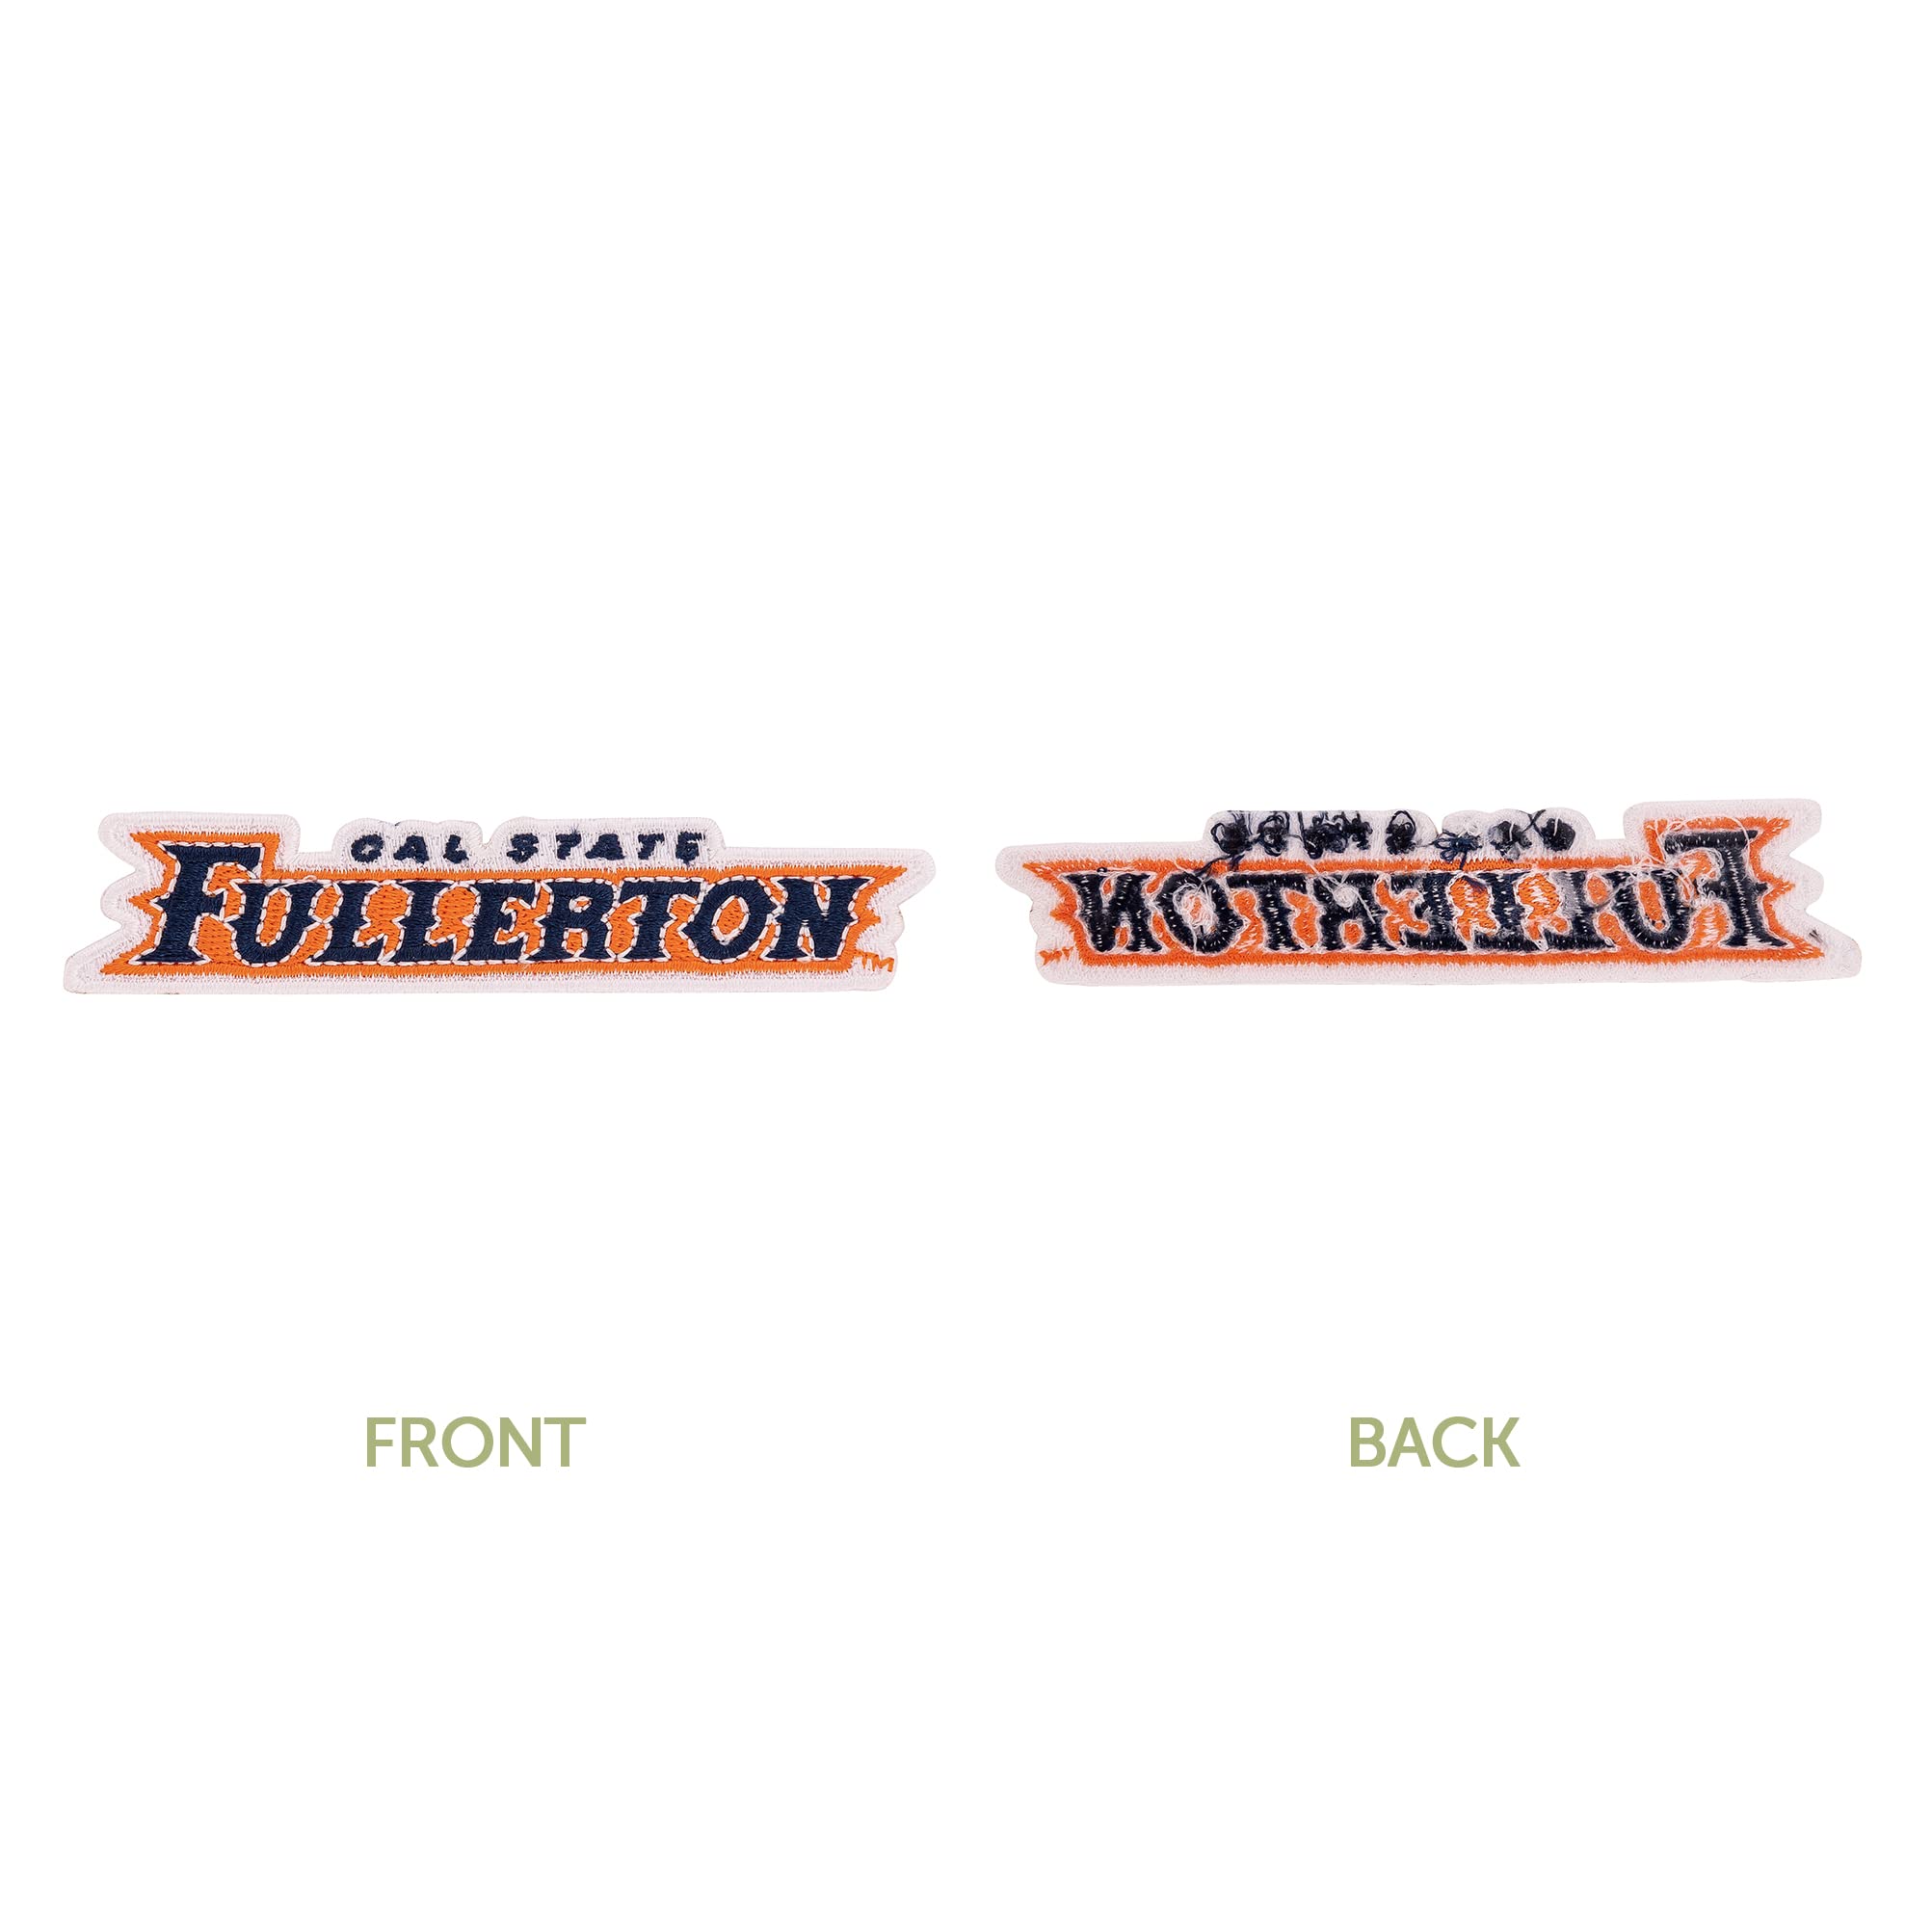 Desert Cactus Cal State Fullerton Patch University California Titans CSUF Embroidered Patches Applique Sew or Iron On Blazer Jacket Bag (Patch - Design A)